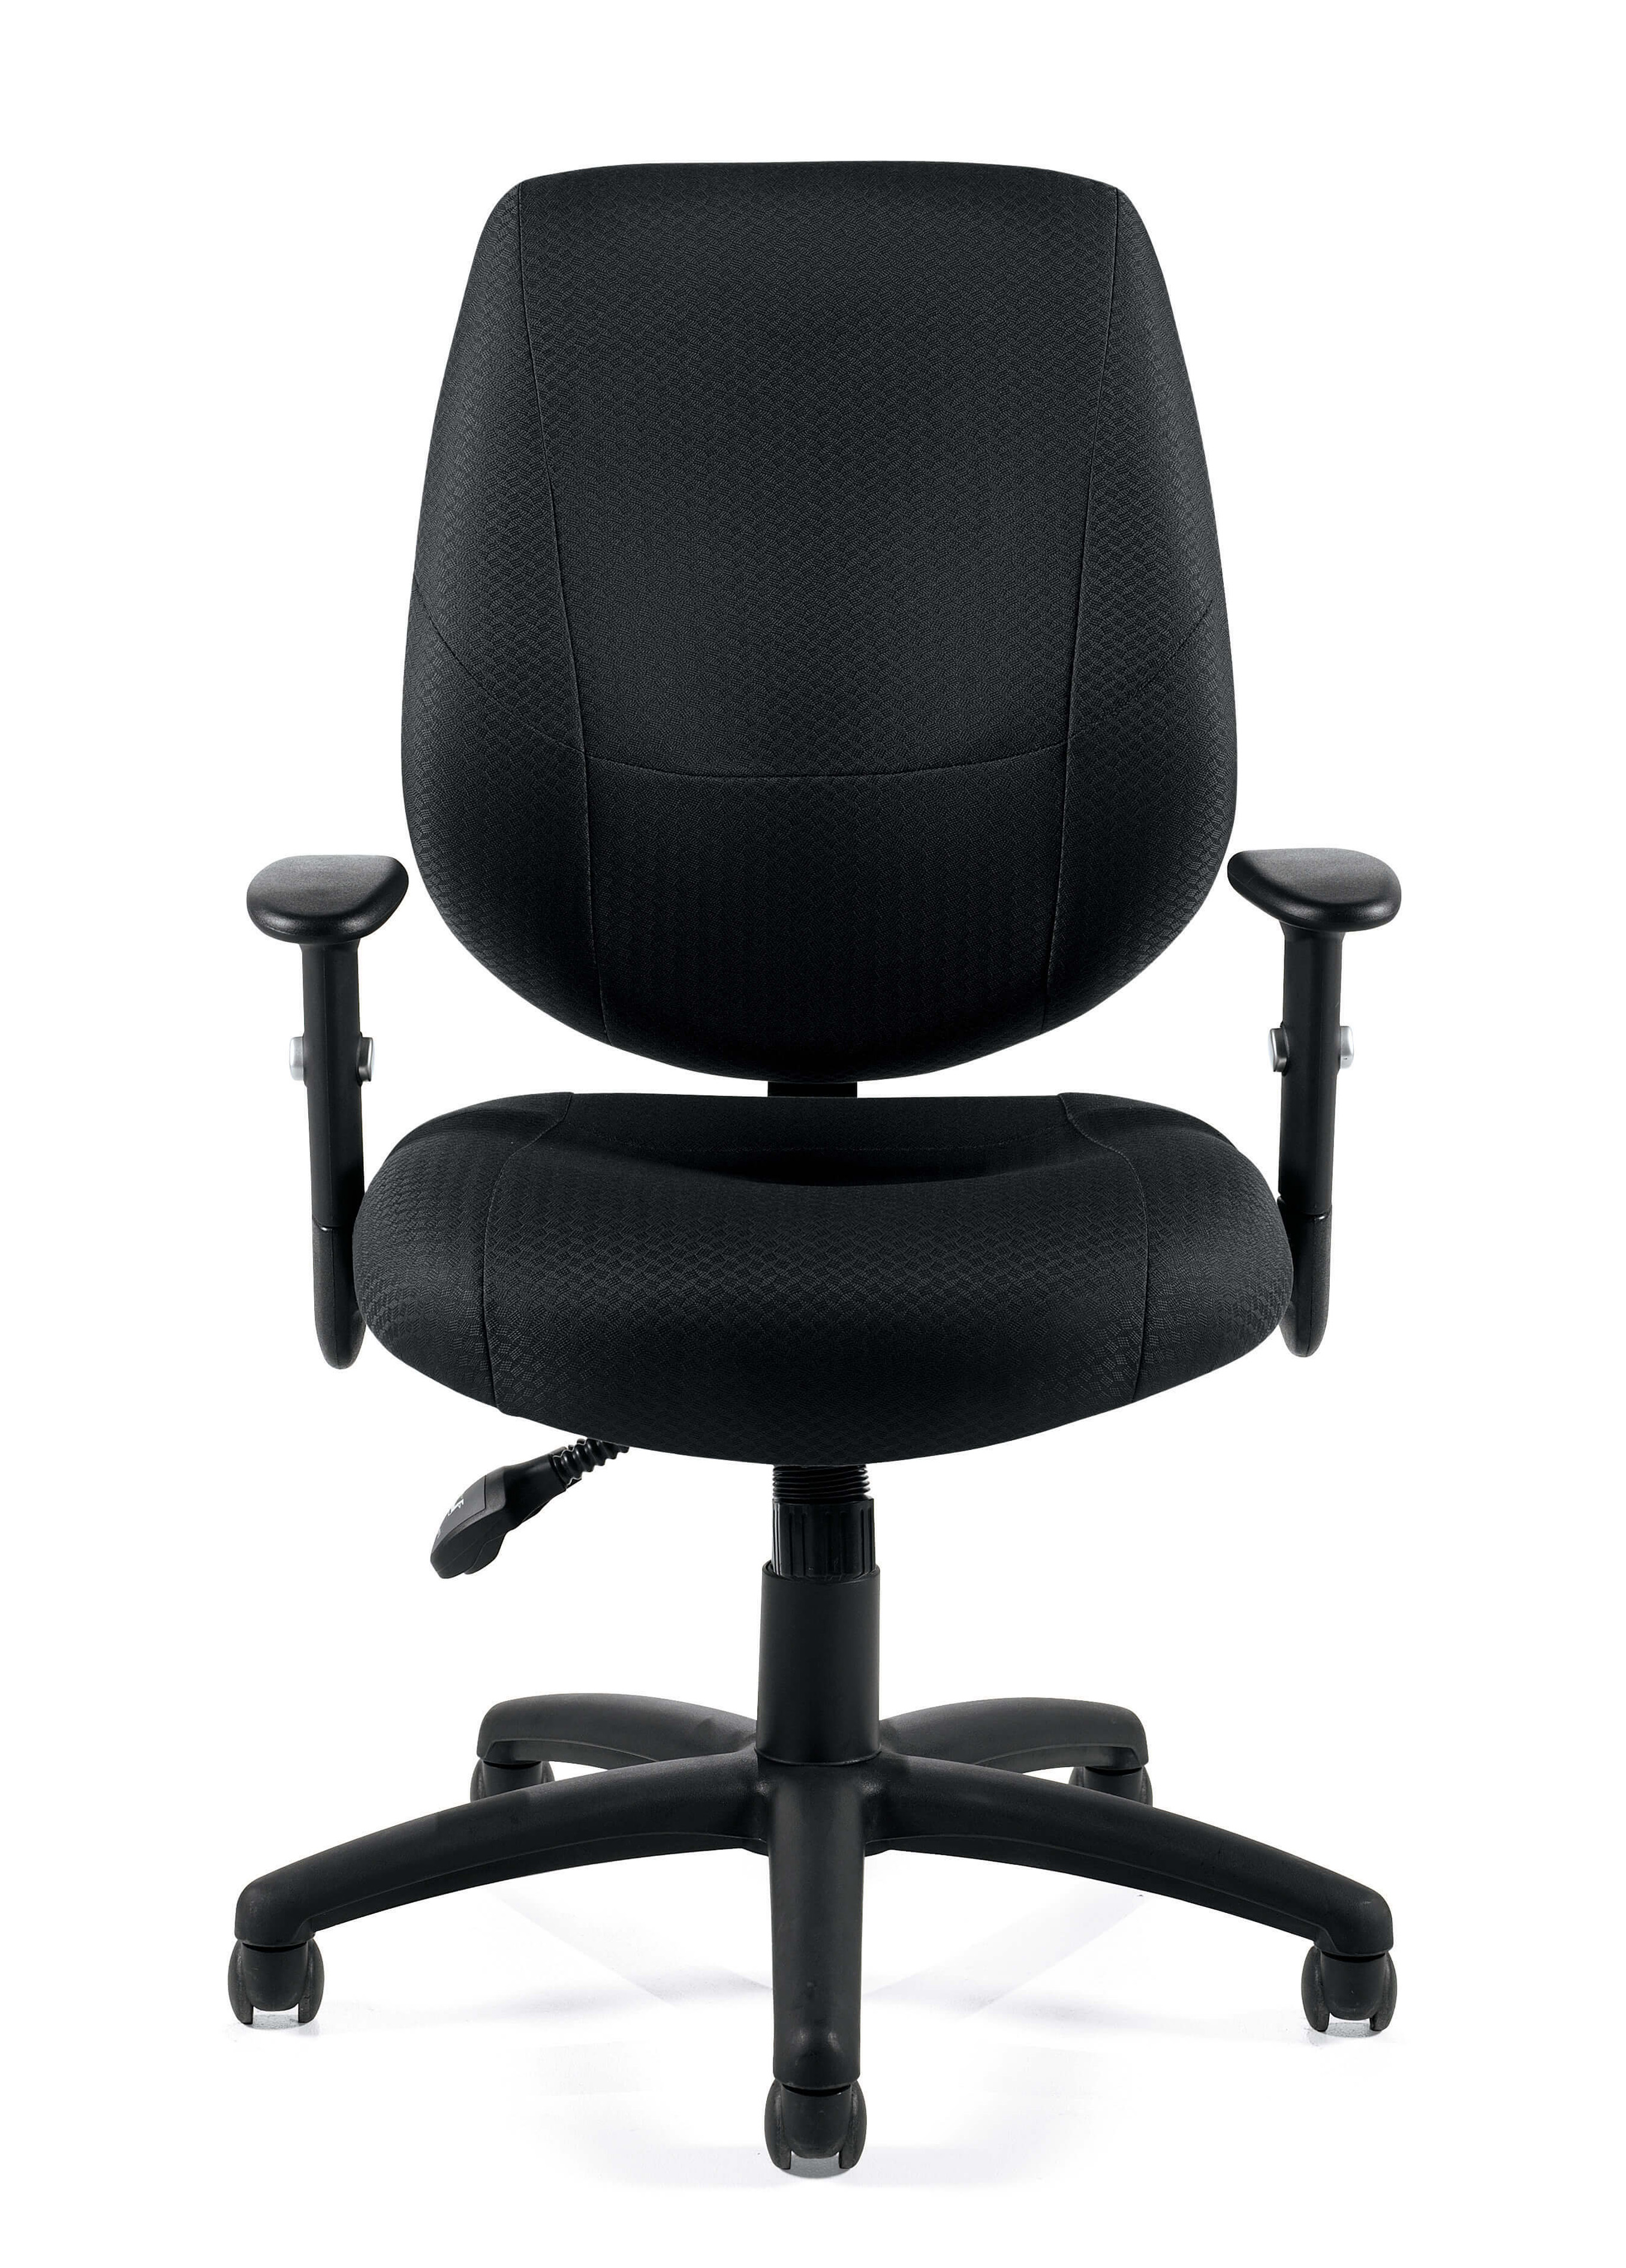 Ergonomic task chair front view